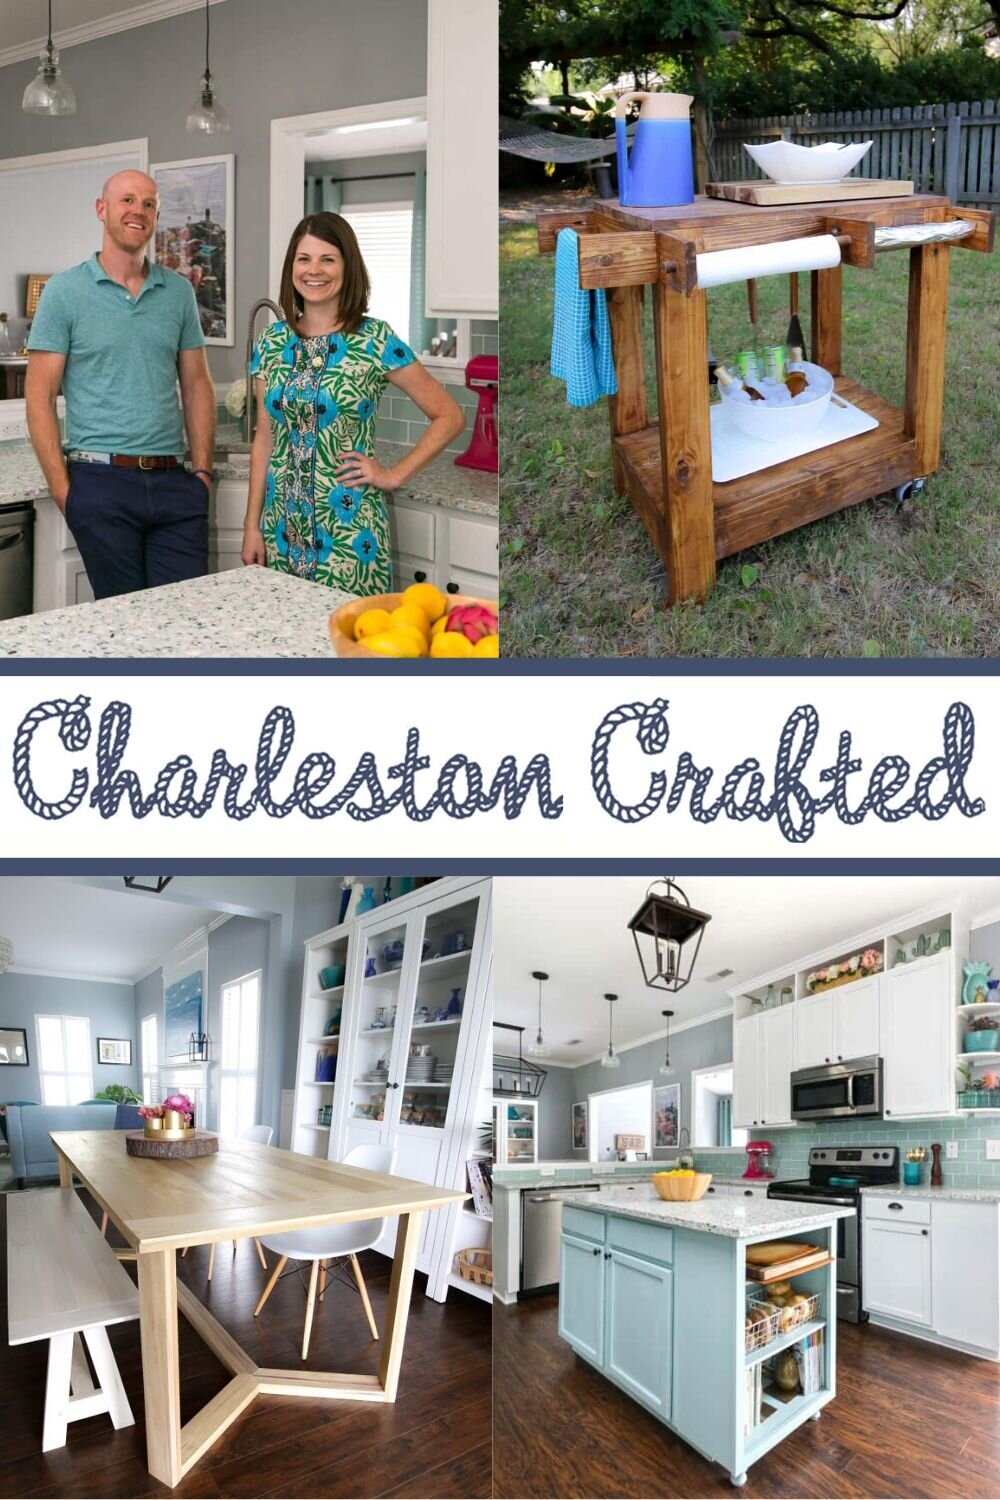 Charlestoncrafted about collage.jpg